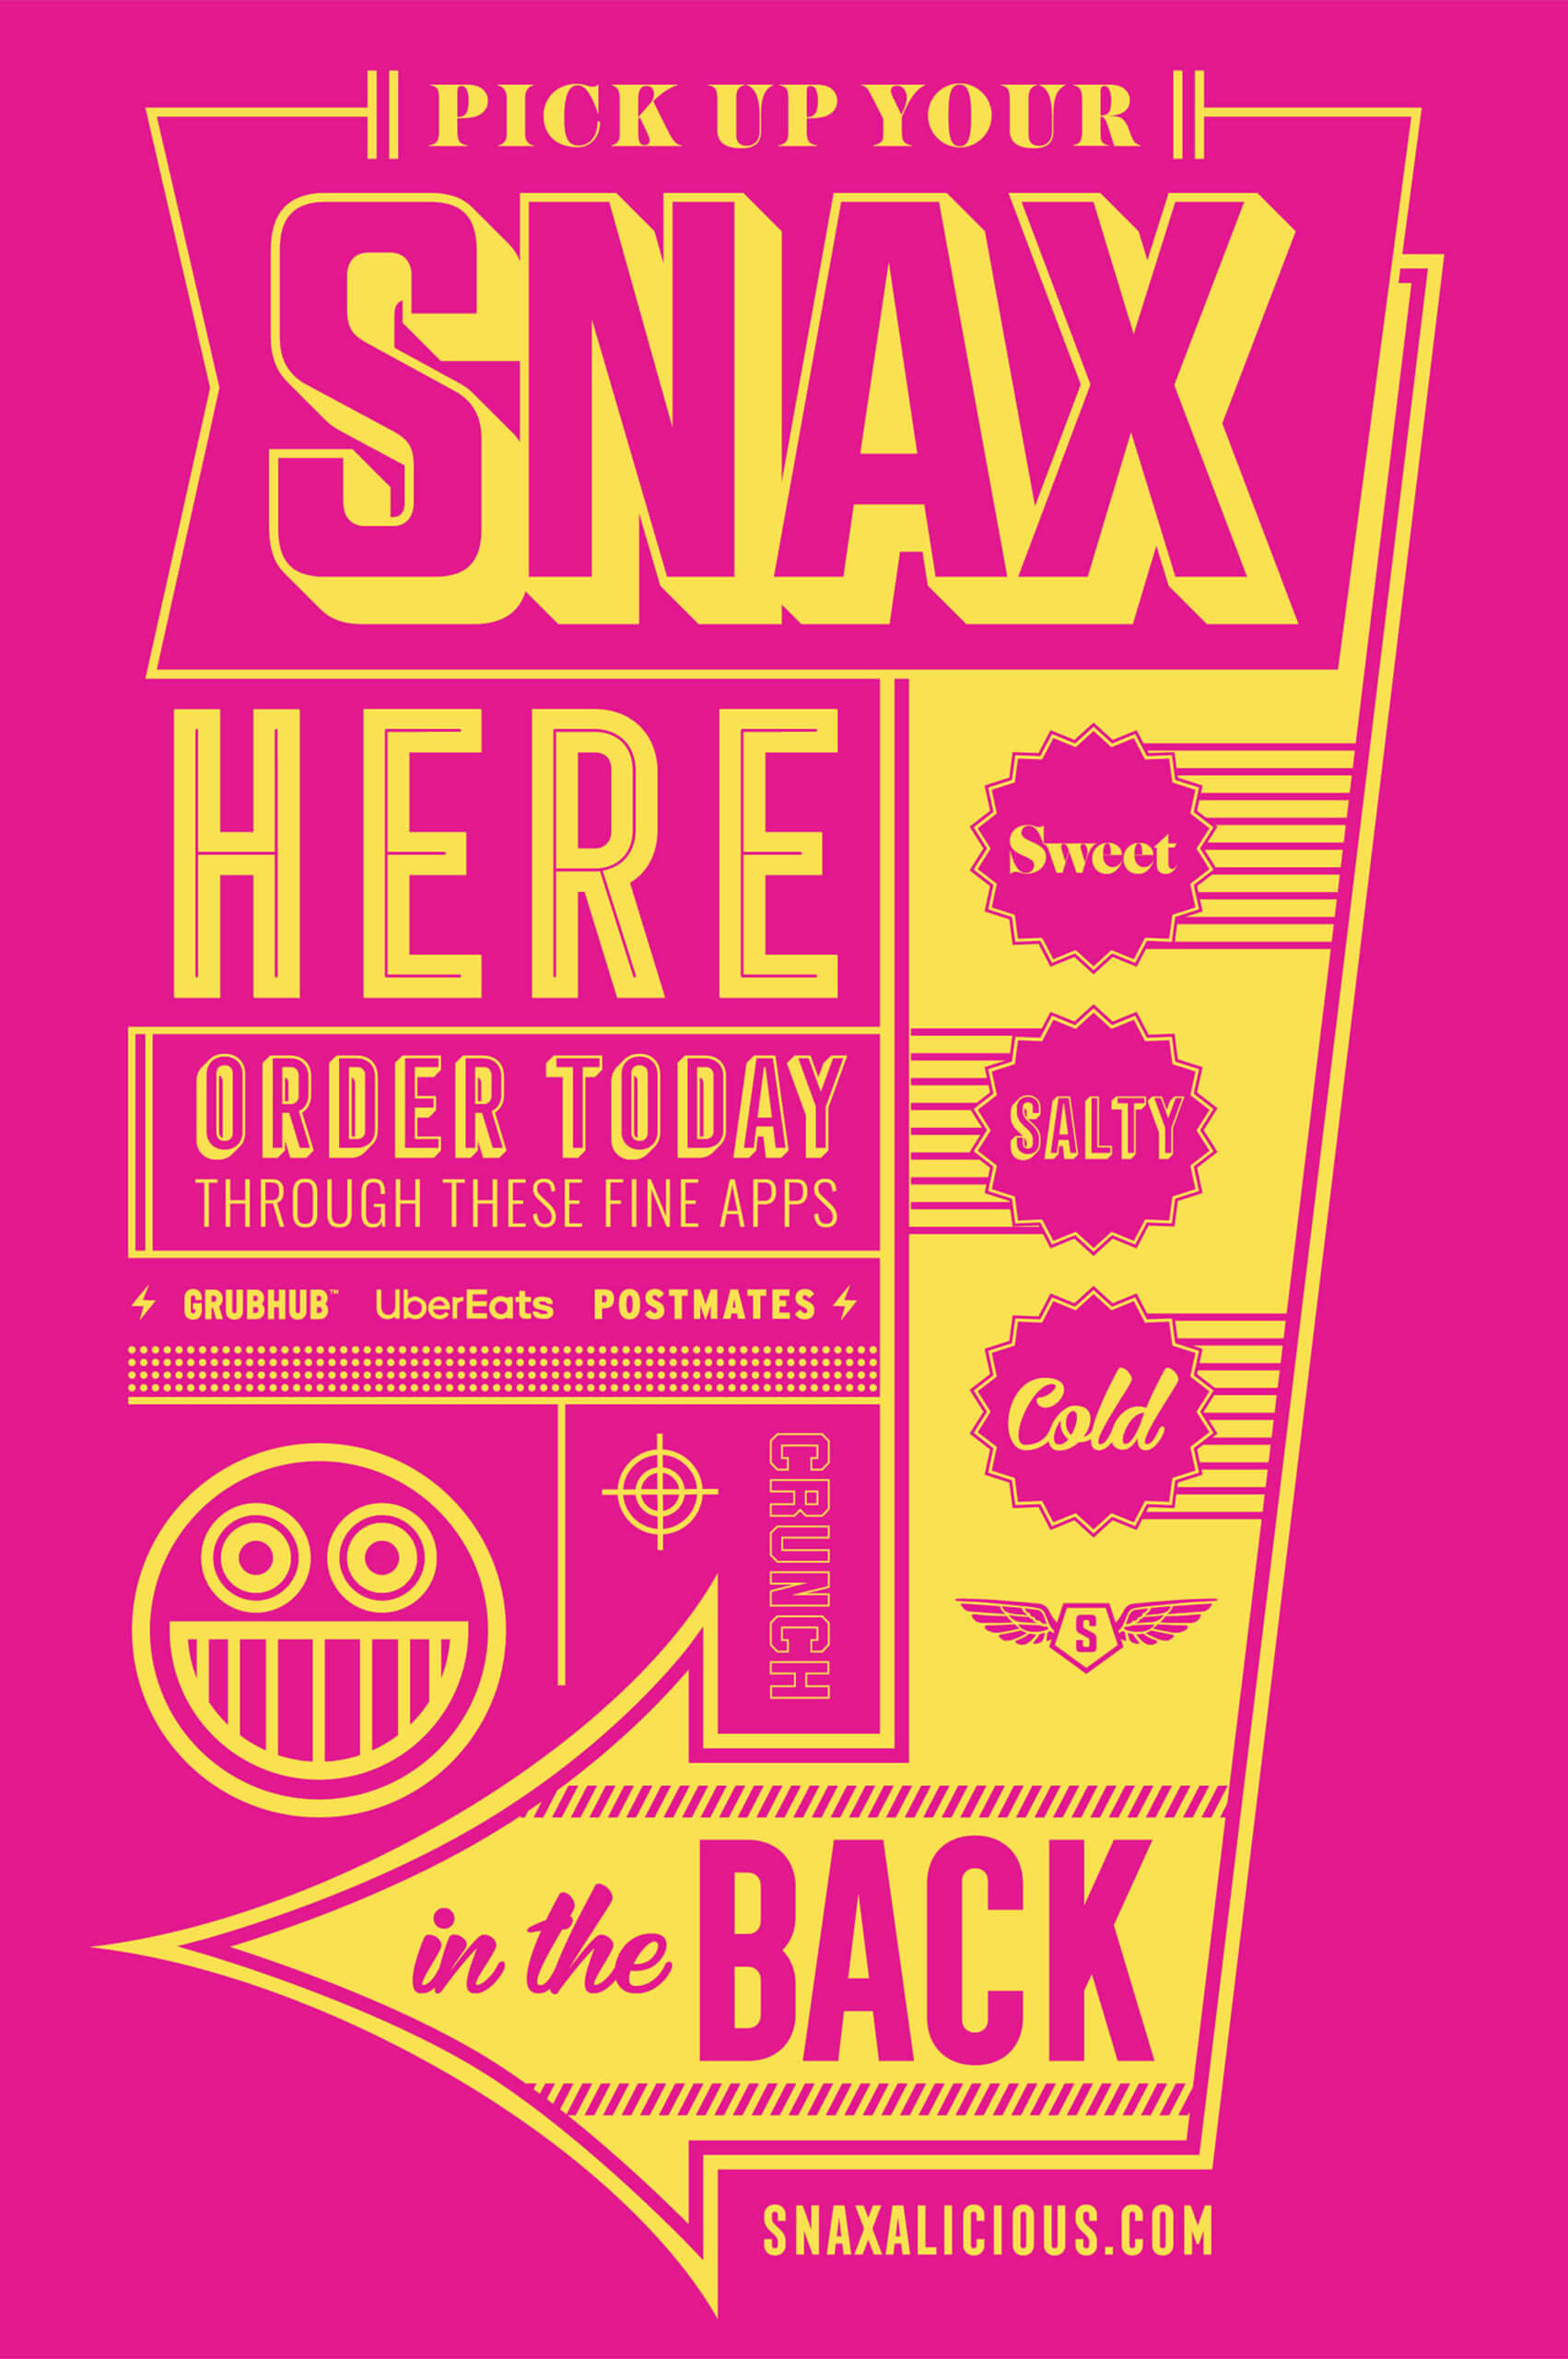 Pick up your snax here order today through these fine apps